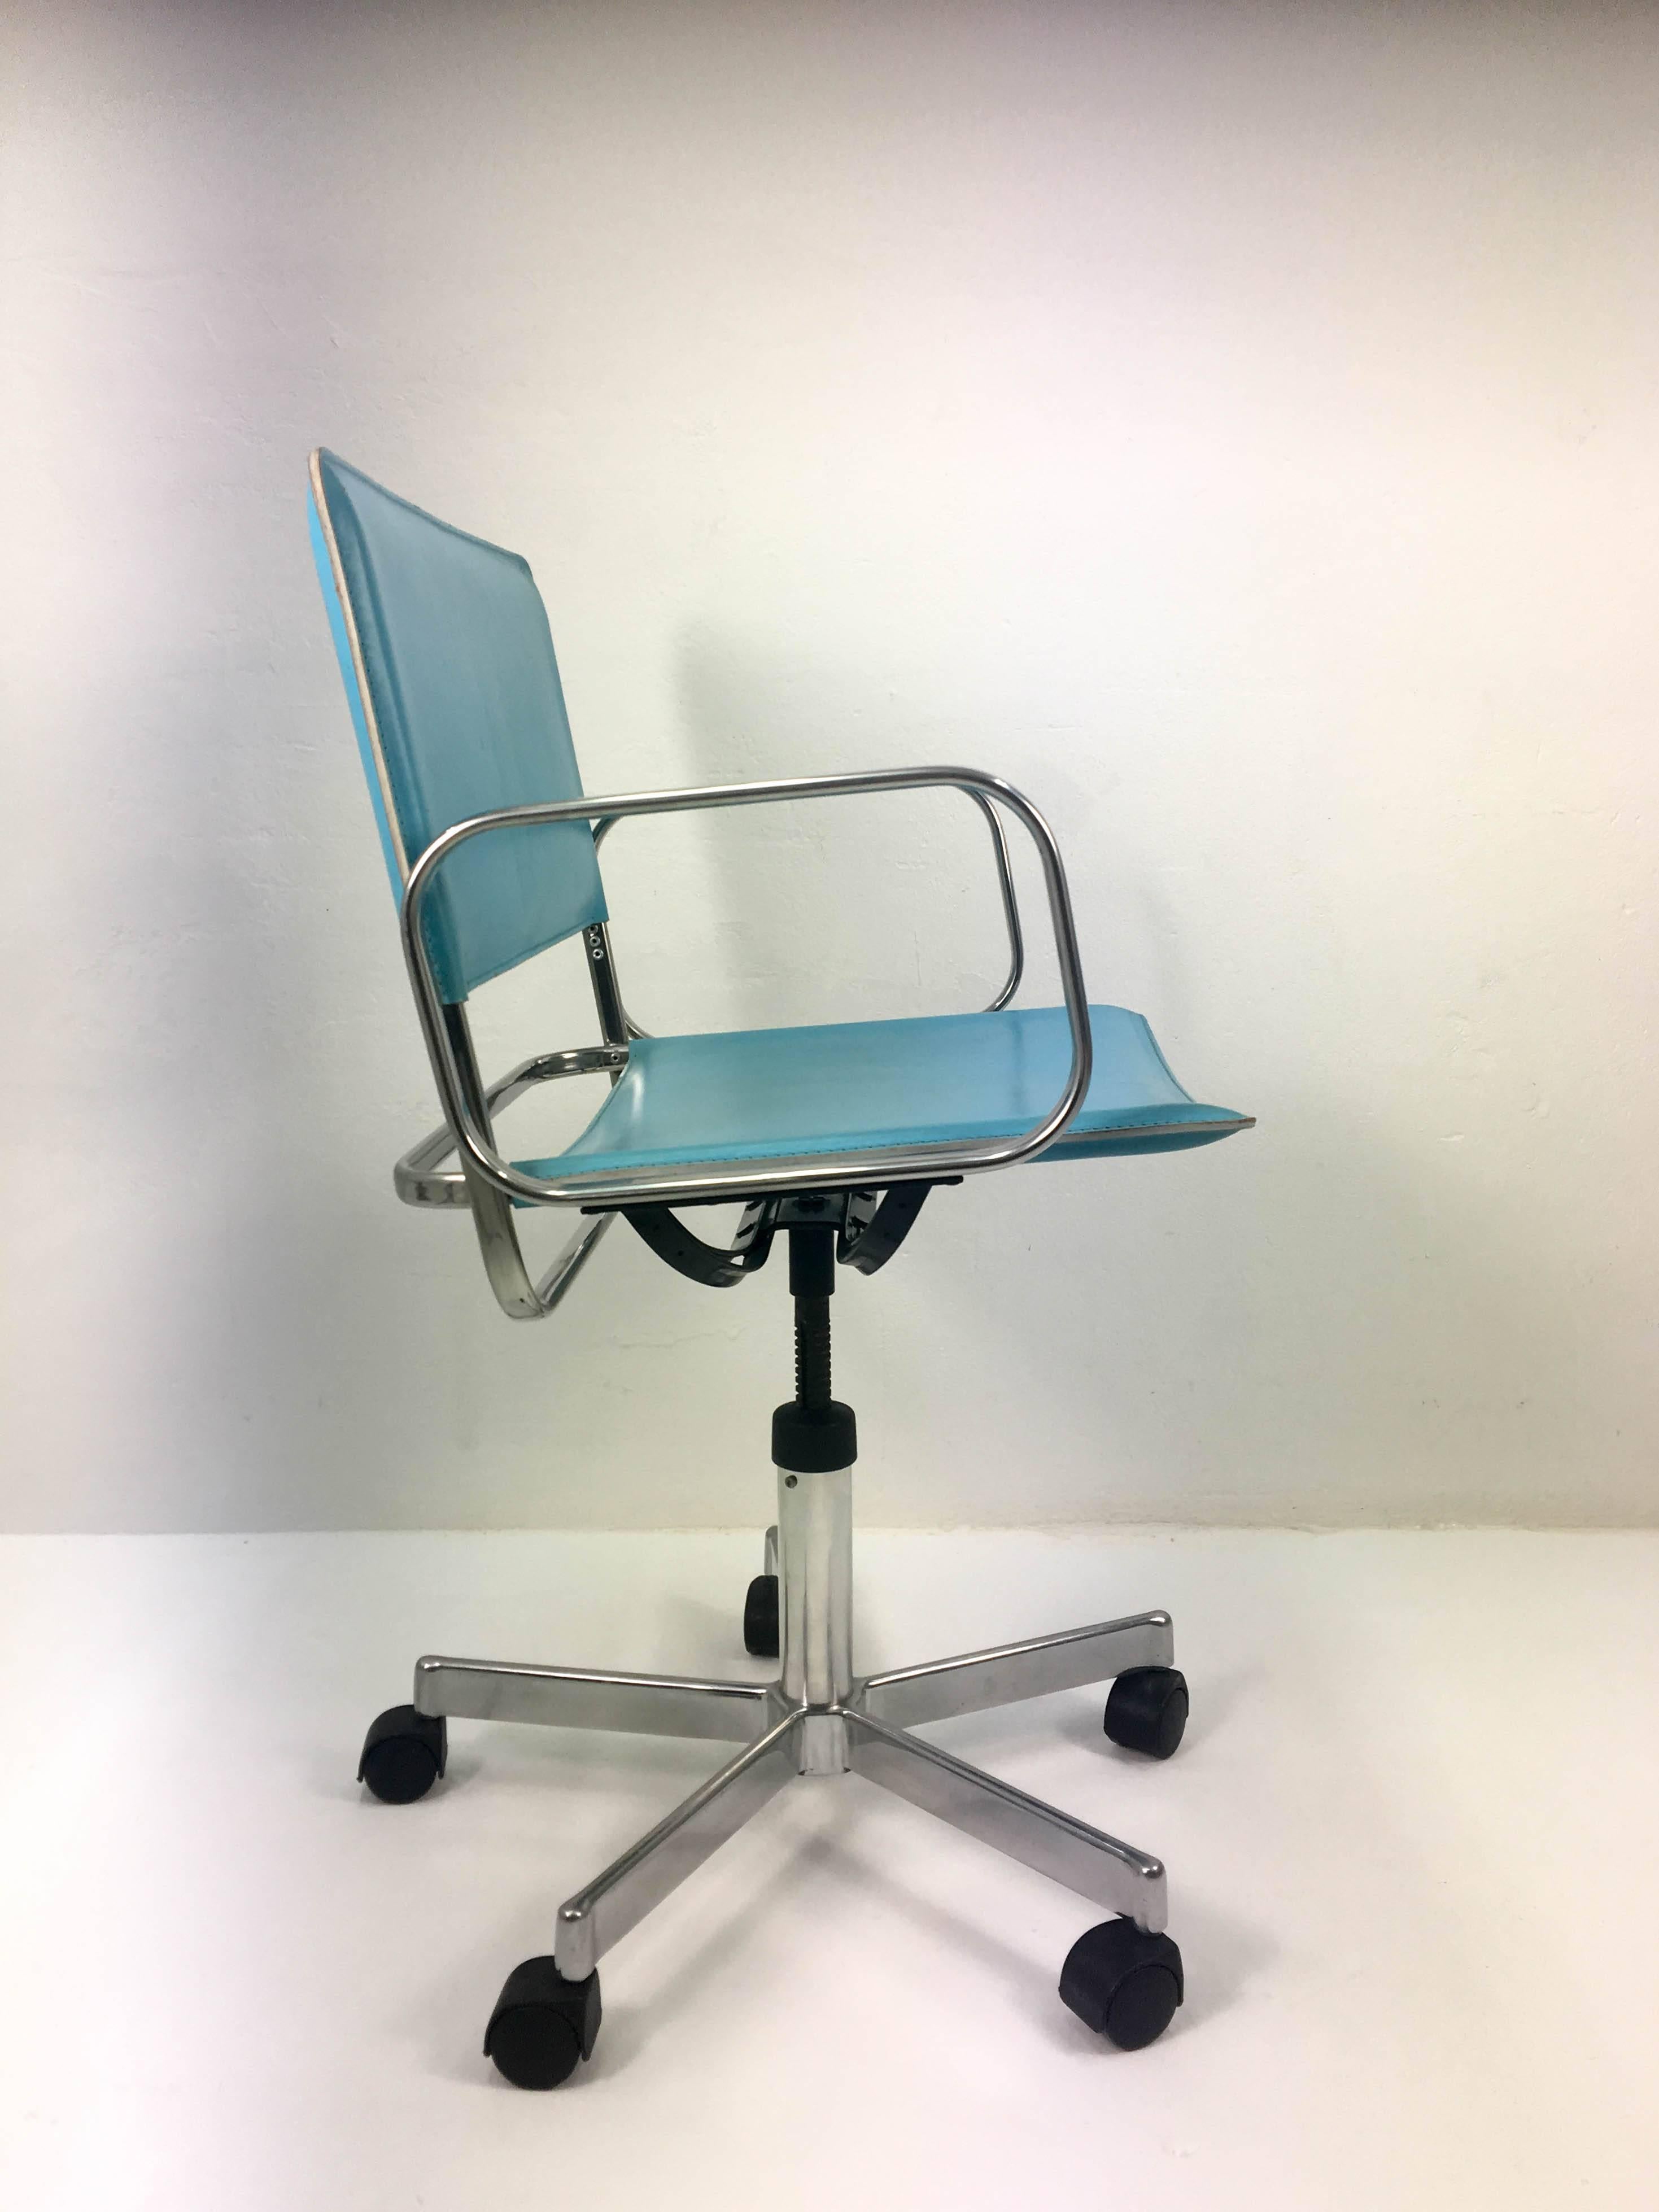 Vintage Italian Zanotta office chair in a very striking powder blue leather finish. Model Della Legge 883 ('the law 883'). Height adjustable seat on a stylish five caster base. In good condition.